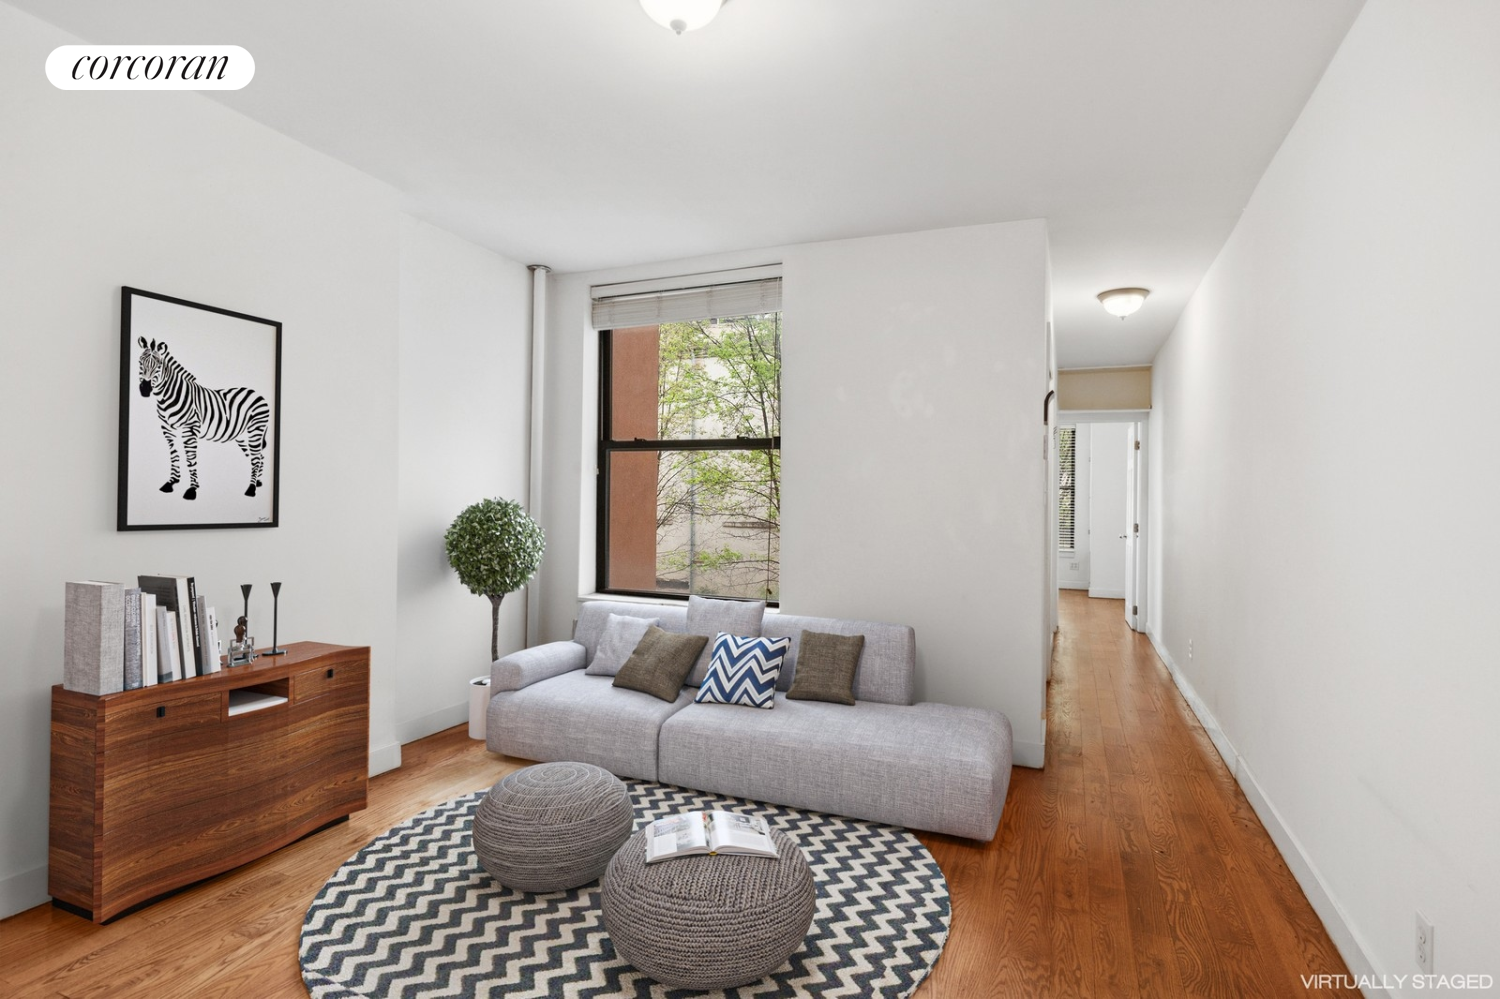 245 West 115th Street 7, South Harlem, Upper Manhattan, NYC - 1 Bedrooms  
1 Bathrooms  
3 Rooms - 